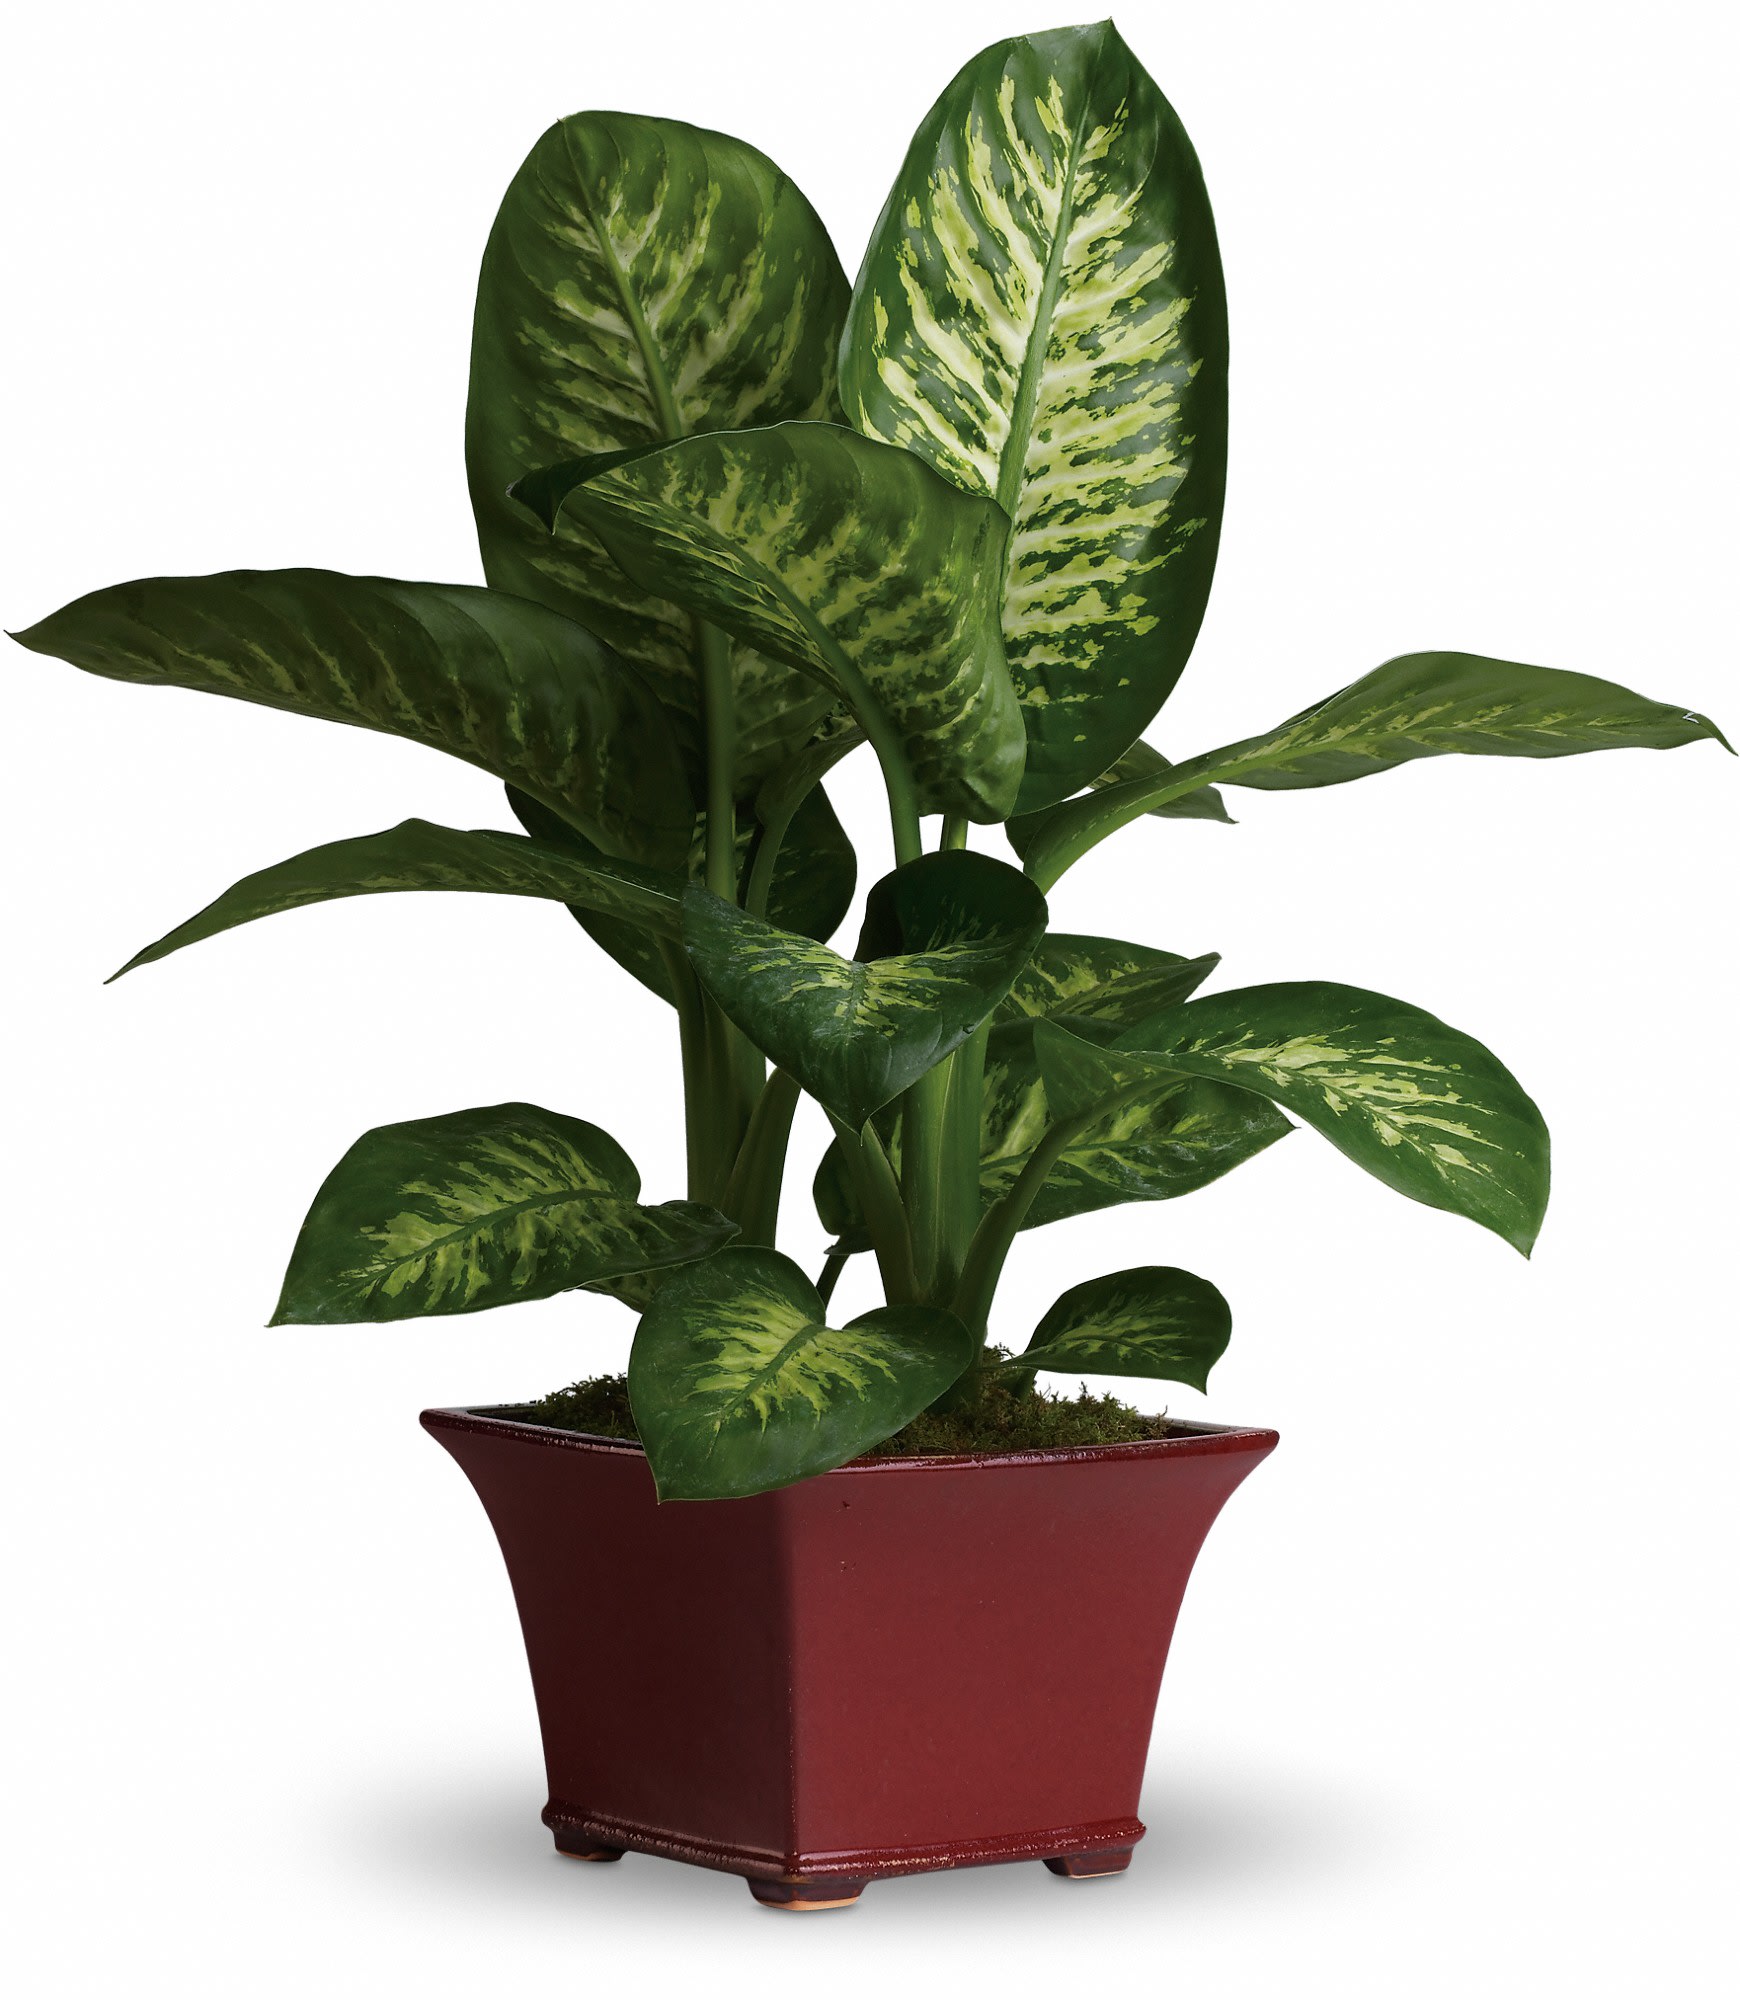 Delightful Dieffenbachia - T104-2A - This delightful dieffenbachia makes a dashing gift! Rich and relaxing shades of green are on display in this easy-to-care-for leafy plant. A wonderful workplace gift!    A beautiful dieffenbachia is delivered in an elegant burgundy square container.    Approximately 29&quot; W x 31 1/2&quot; H    Orientation: N/A        As Shown : T104-2A    